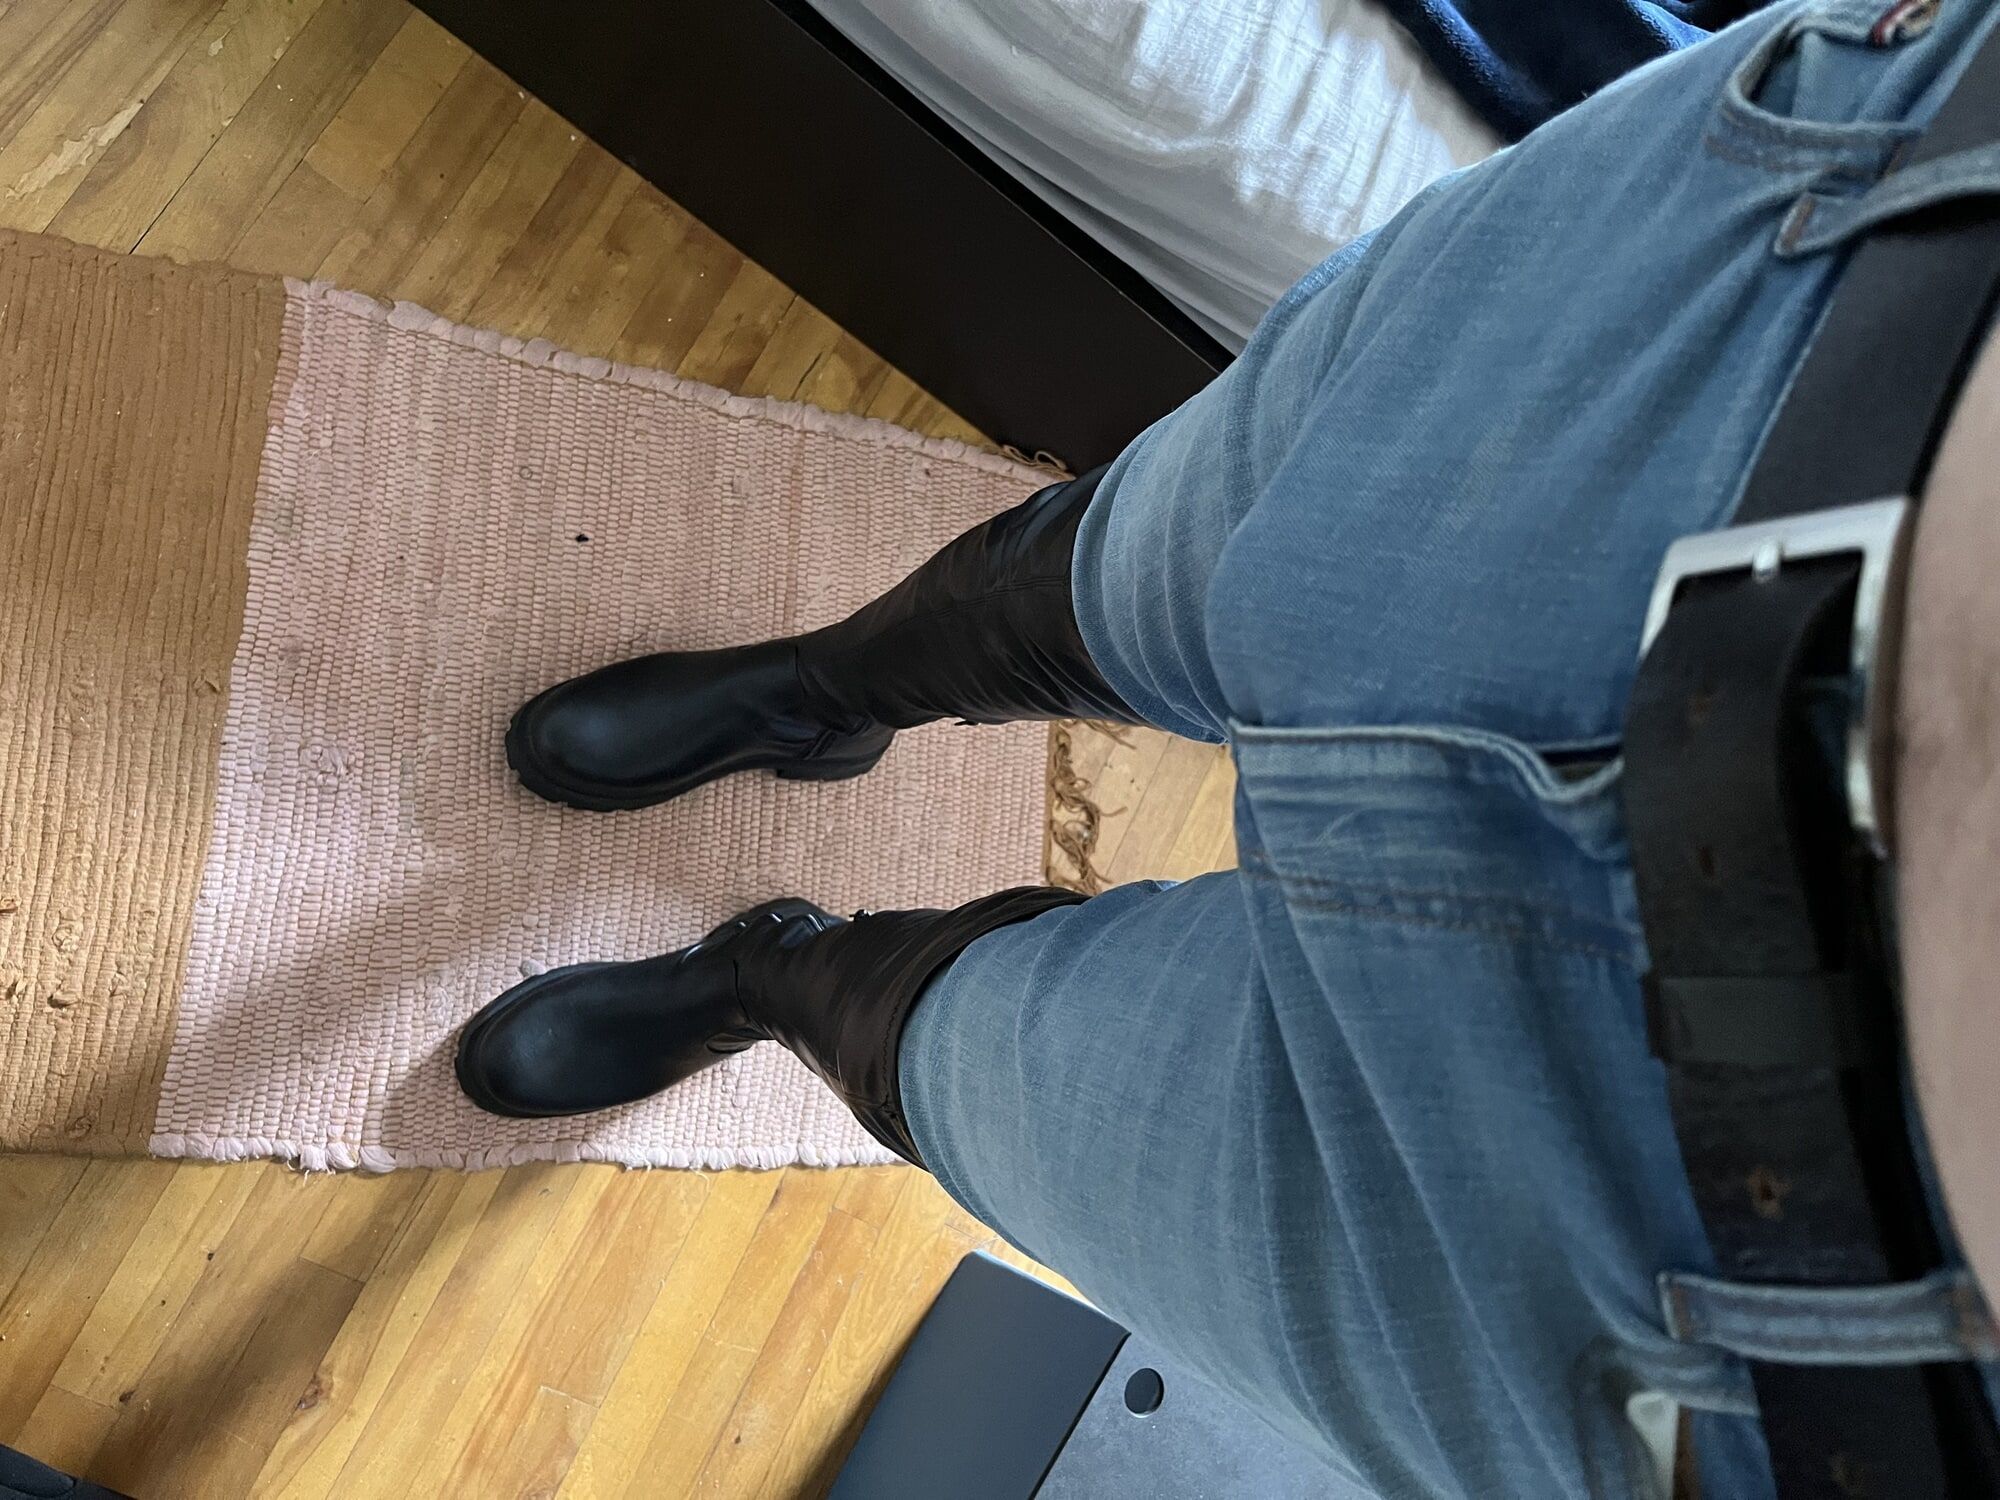 My New Tight Jeans and My Big Hard Ccock for You #3